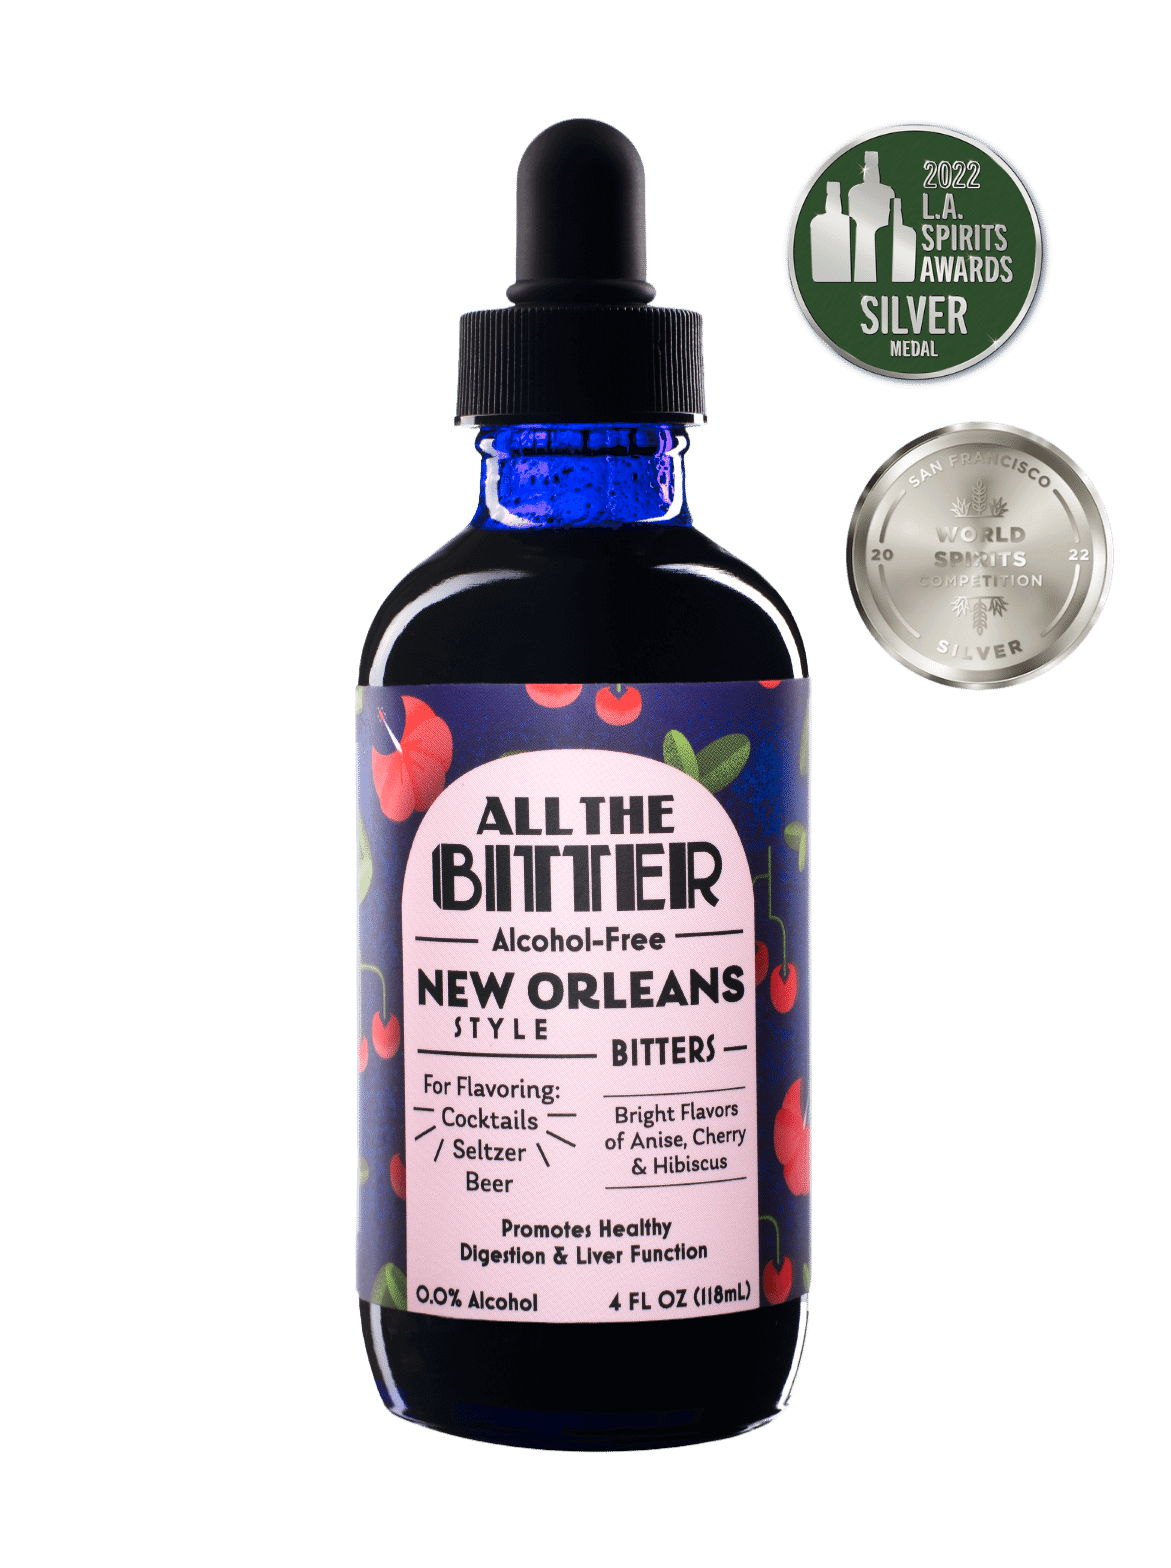 All The Bitter - New Orleans Bitters